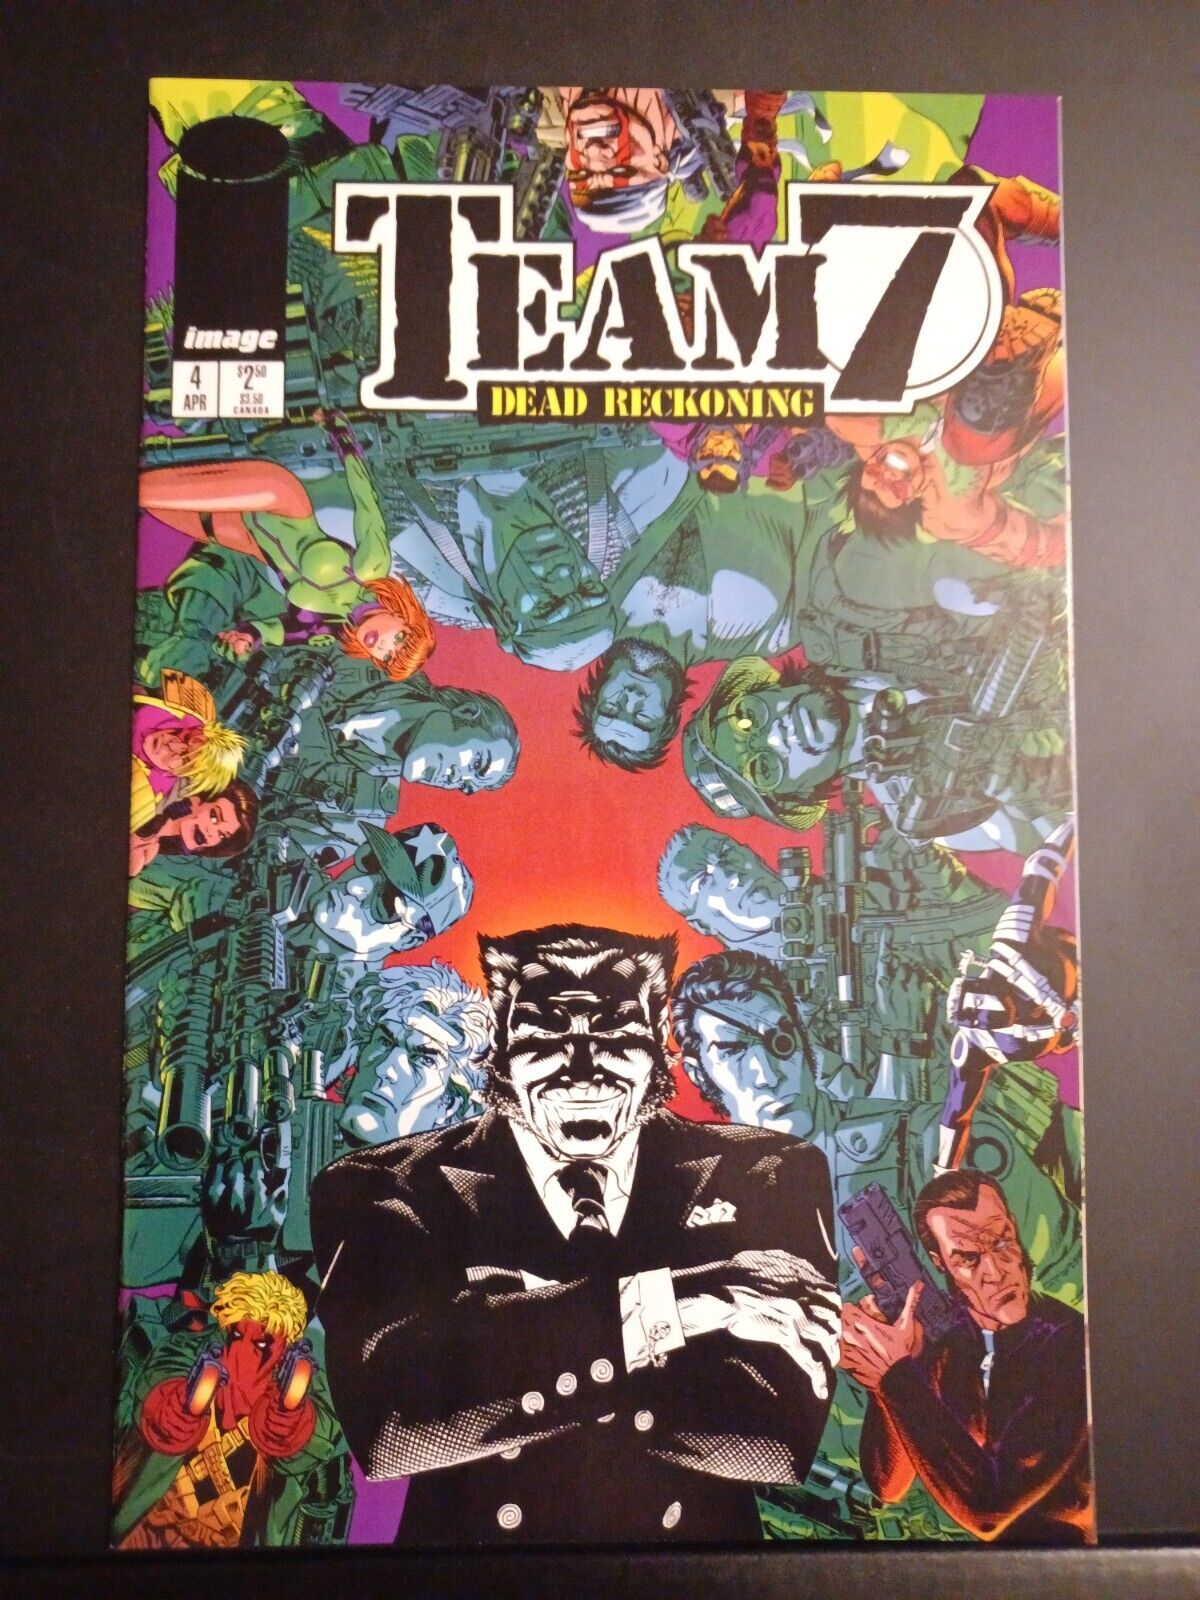 Team 7 Dead Reckoning #4 - Wildstorm Early Image - Combined Shipping + 10 Pics